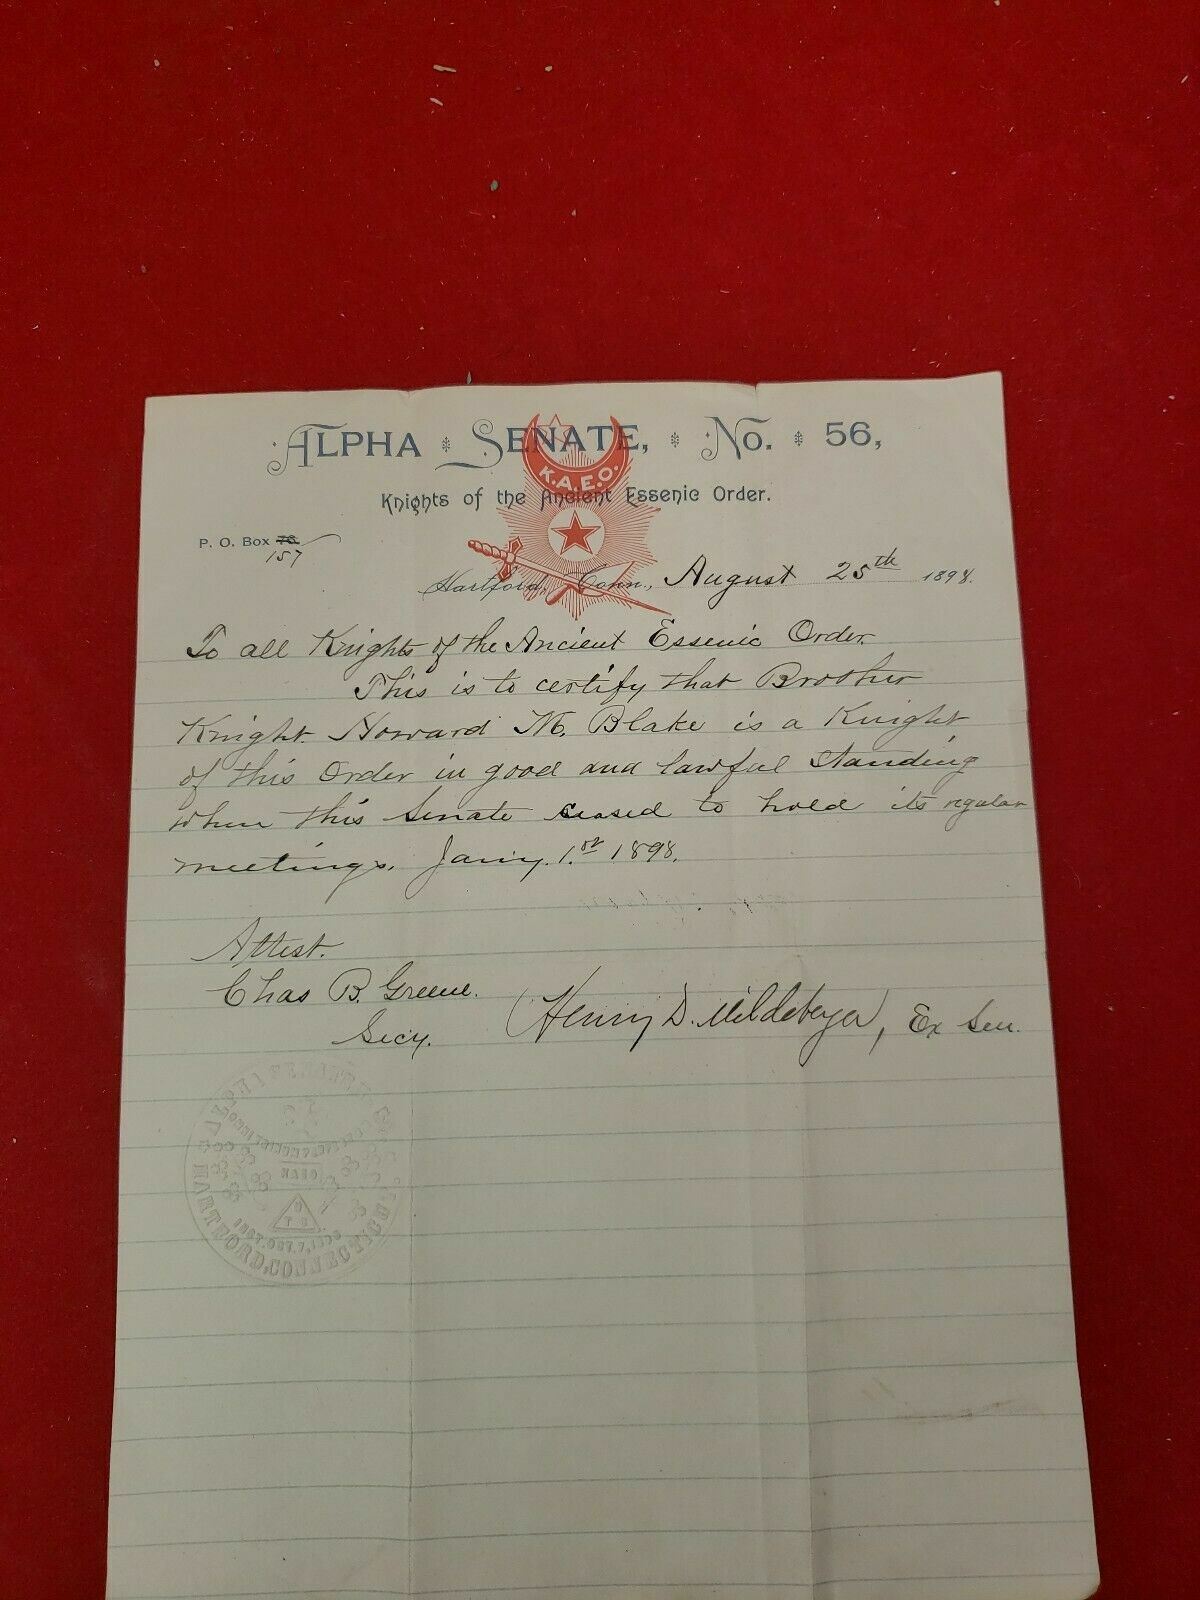 1898 Knights of the Ancient Essenie Order Alpha Senate letter of Knighthood